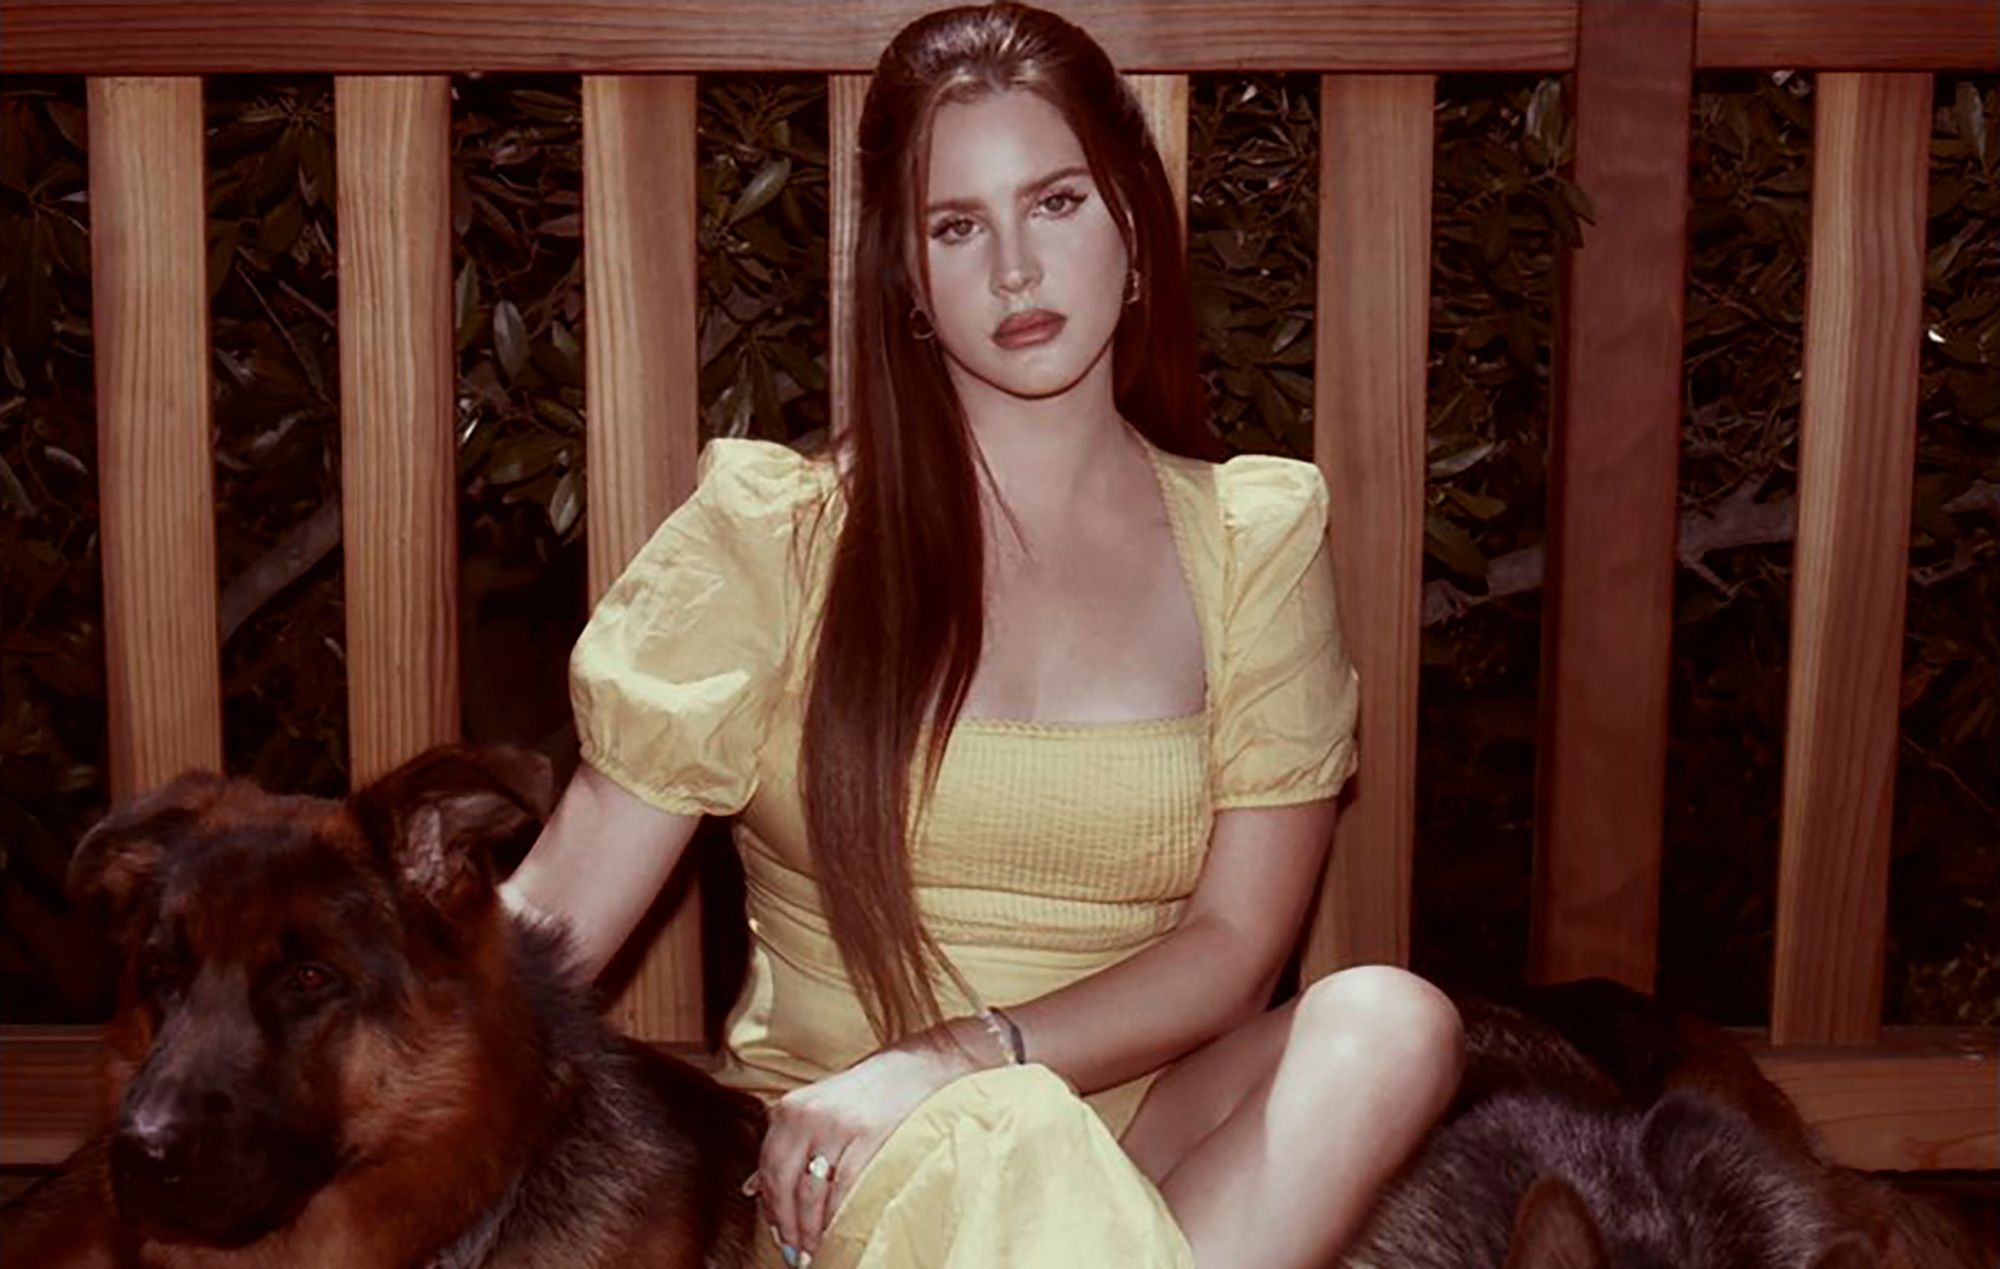 Lana Del Rey’s second album of 2021 is a step up in maturity and personality